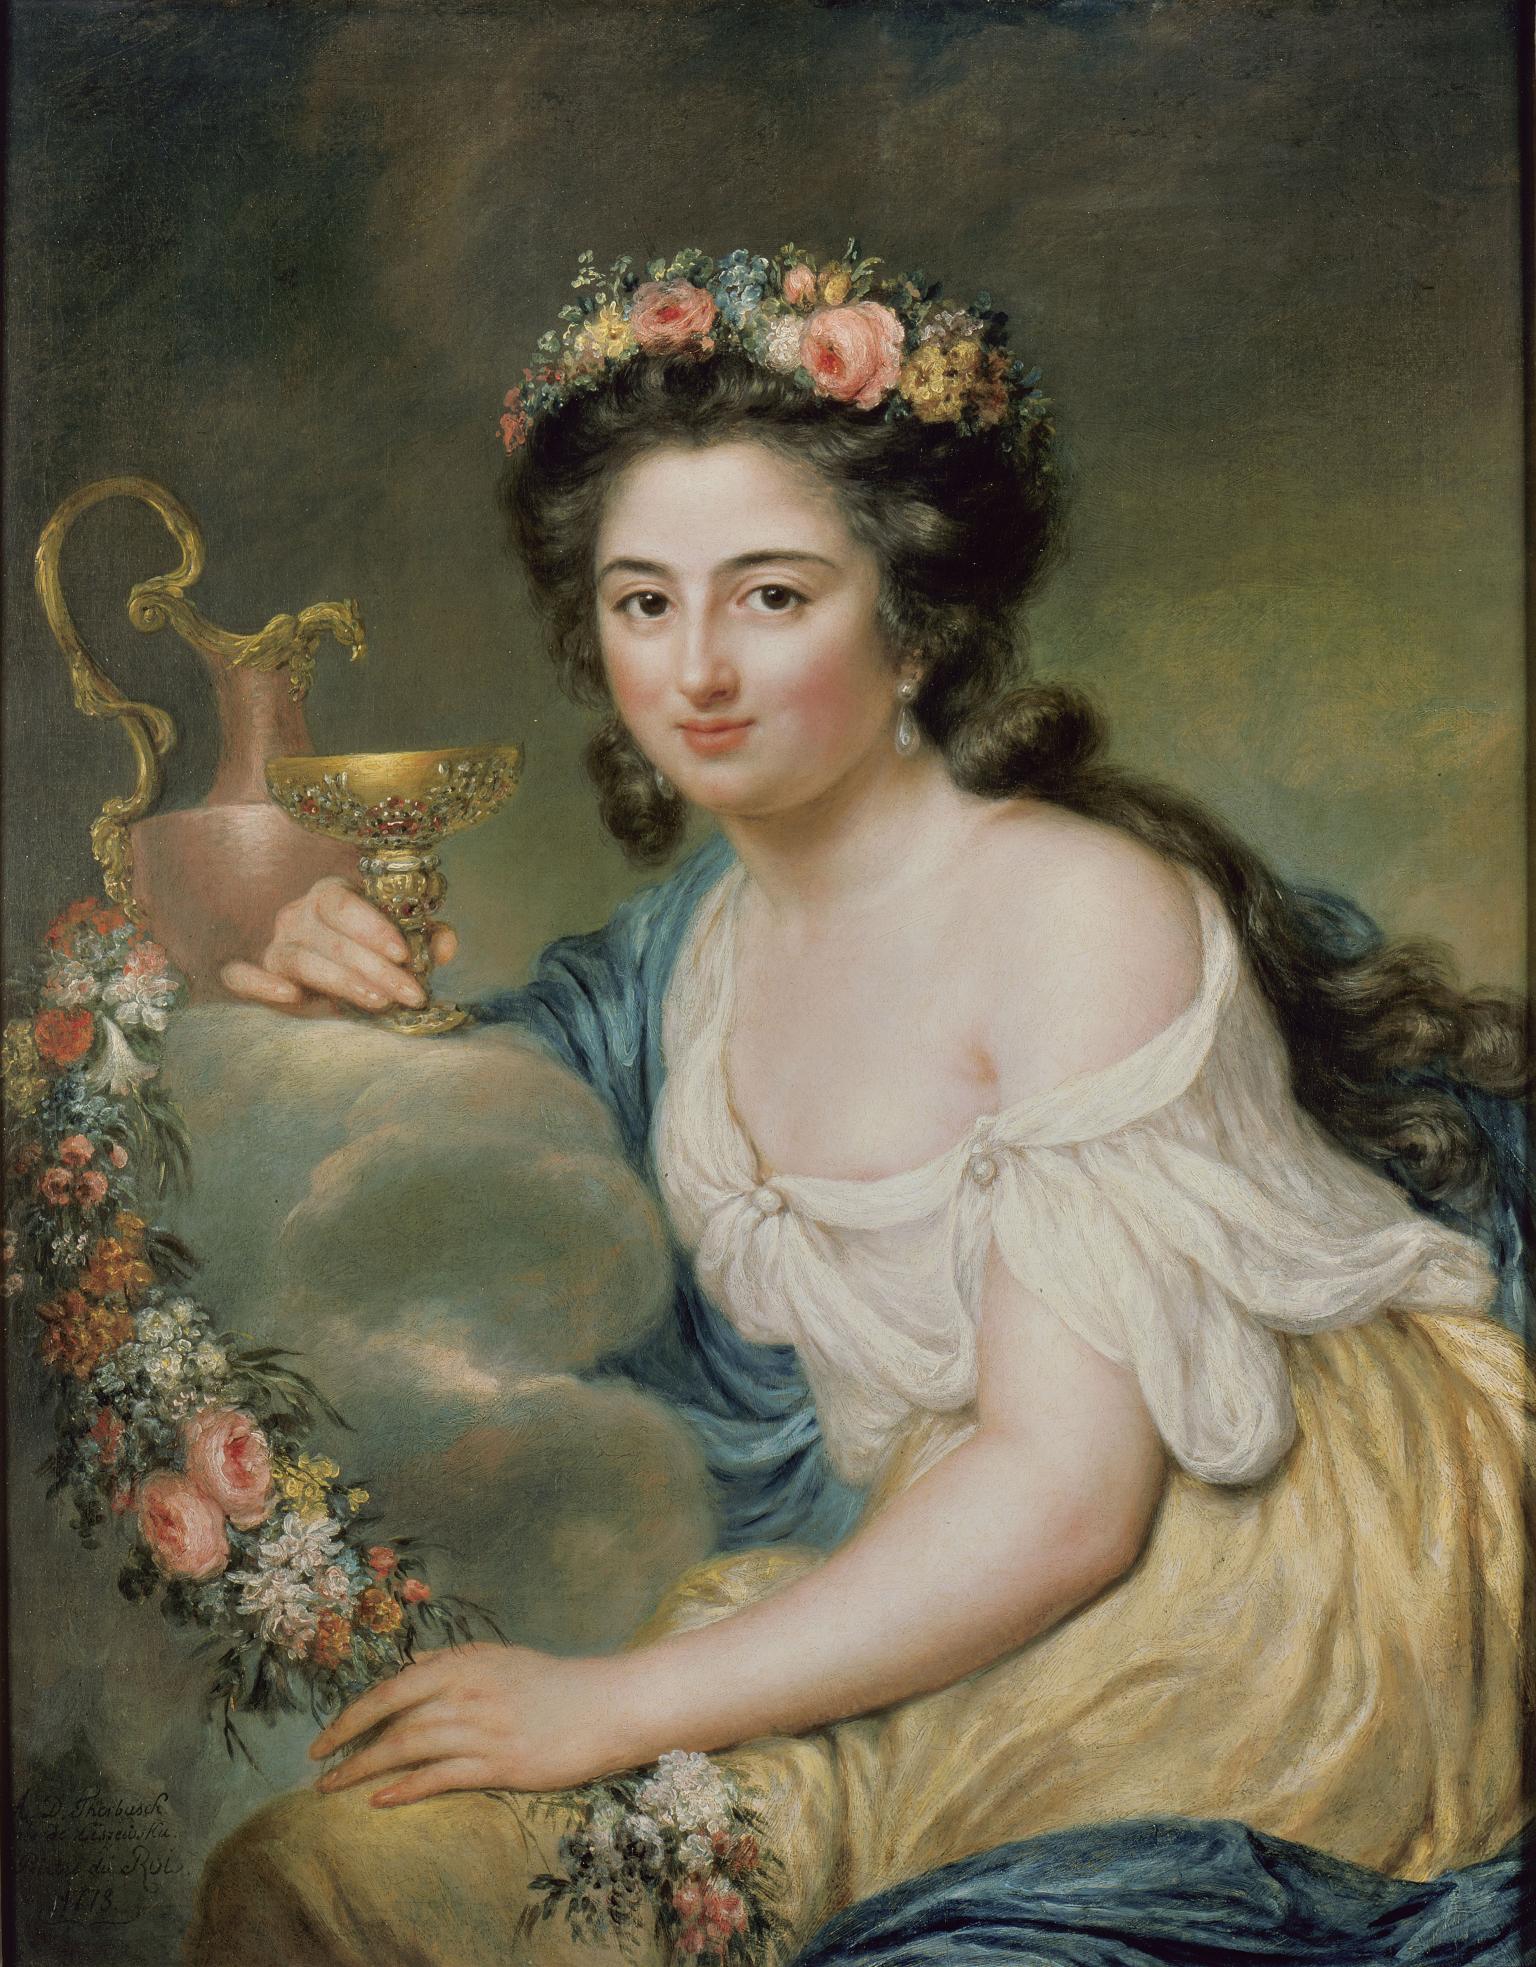 Portrait painting of seated woman facing viewer holding cup and floral garland, wearing flowing dress.